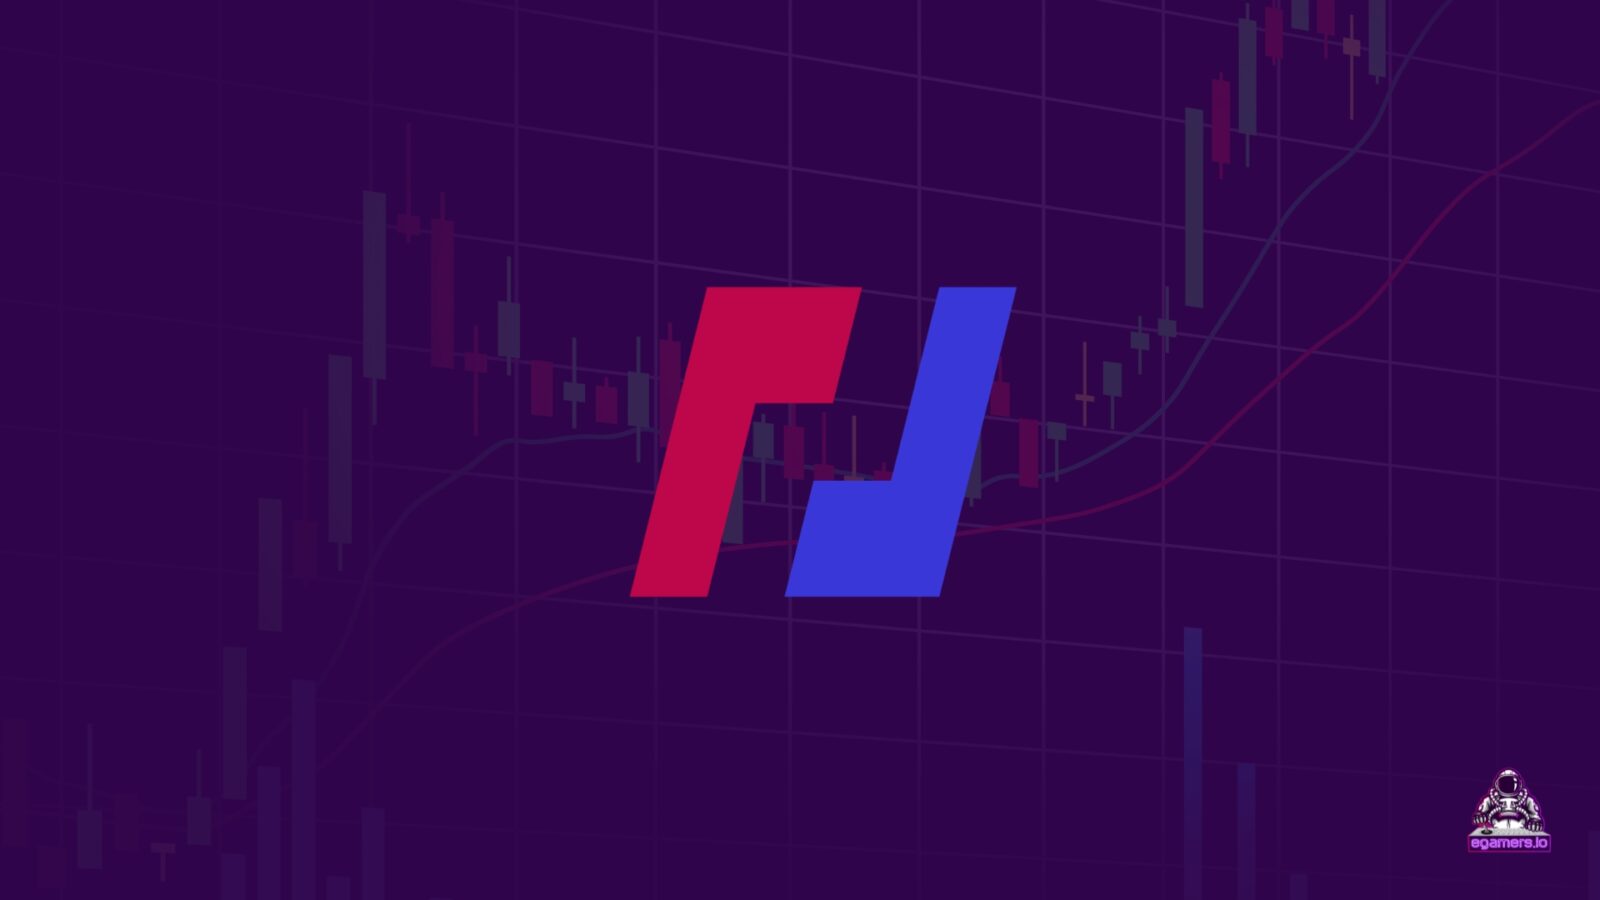 BitMEX Expands Trading Options: Introduces Fee-Free Options Trading and Cash Bonuses